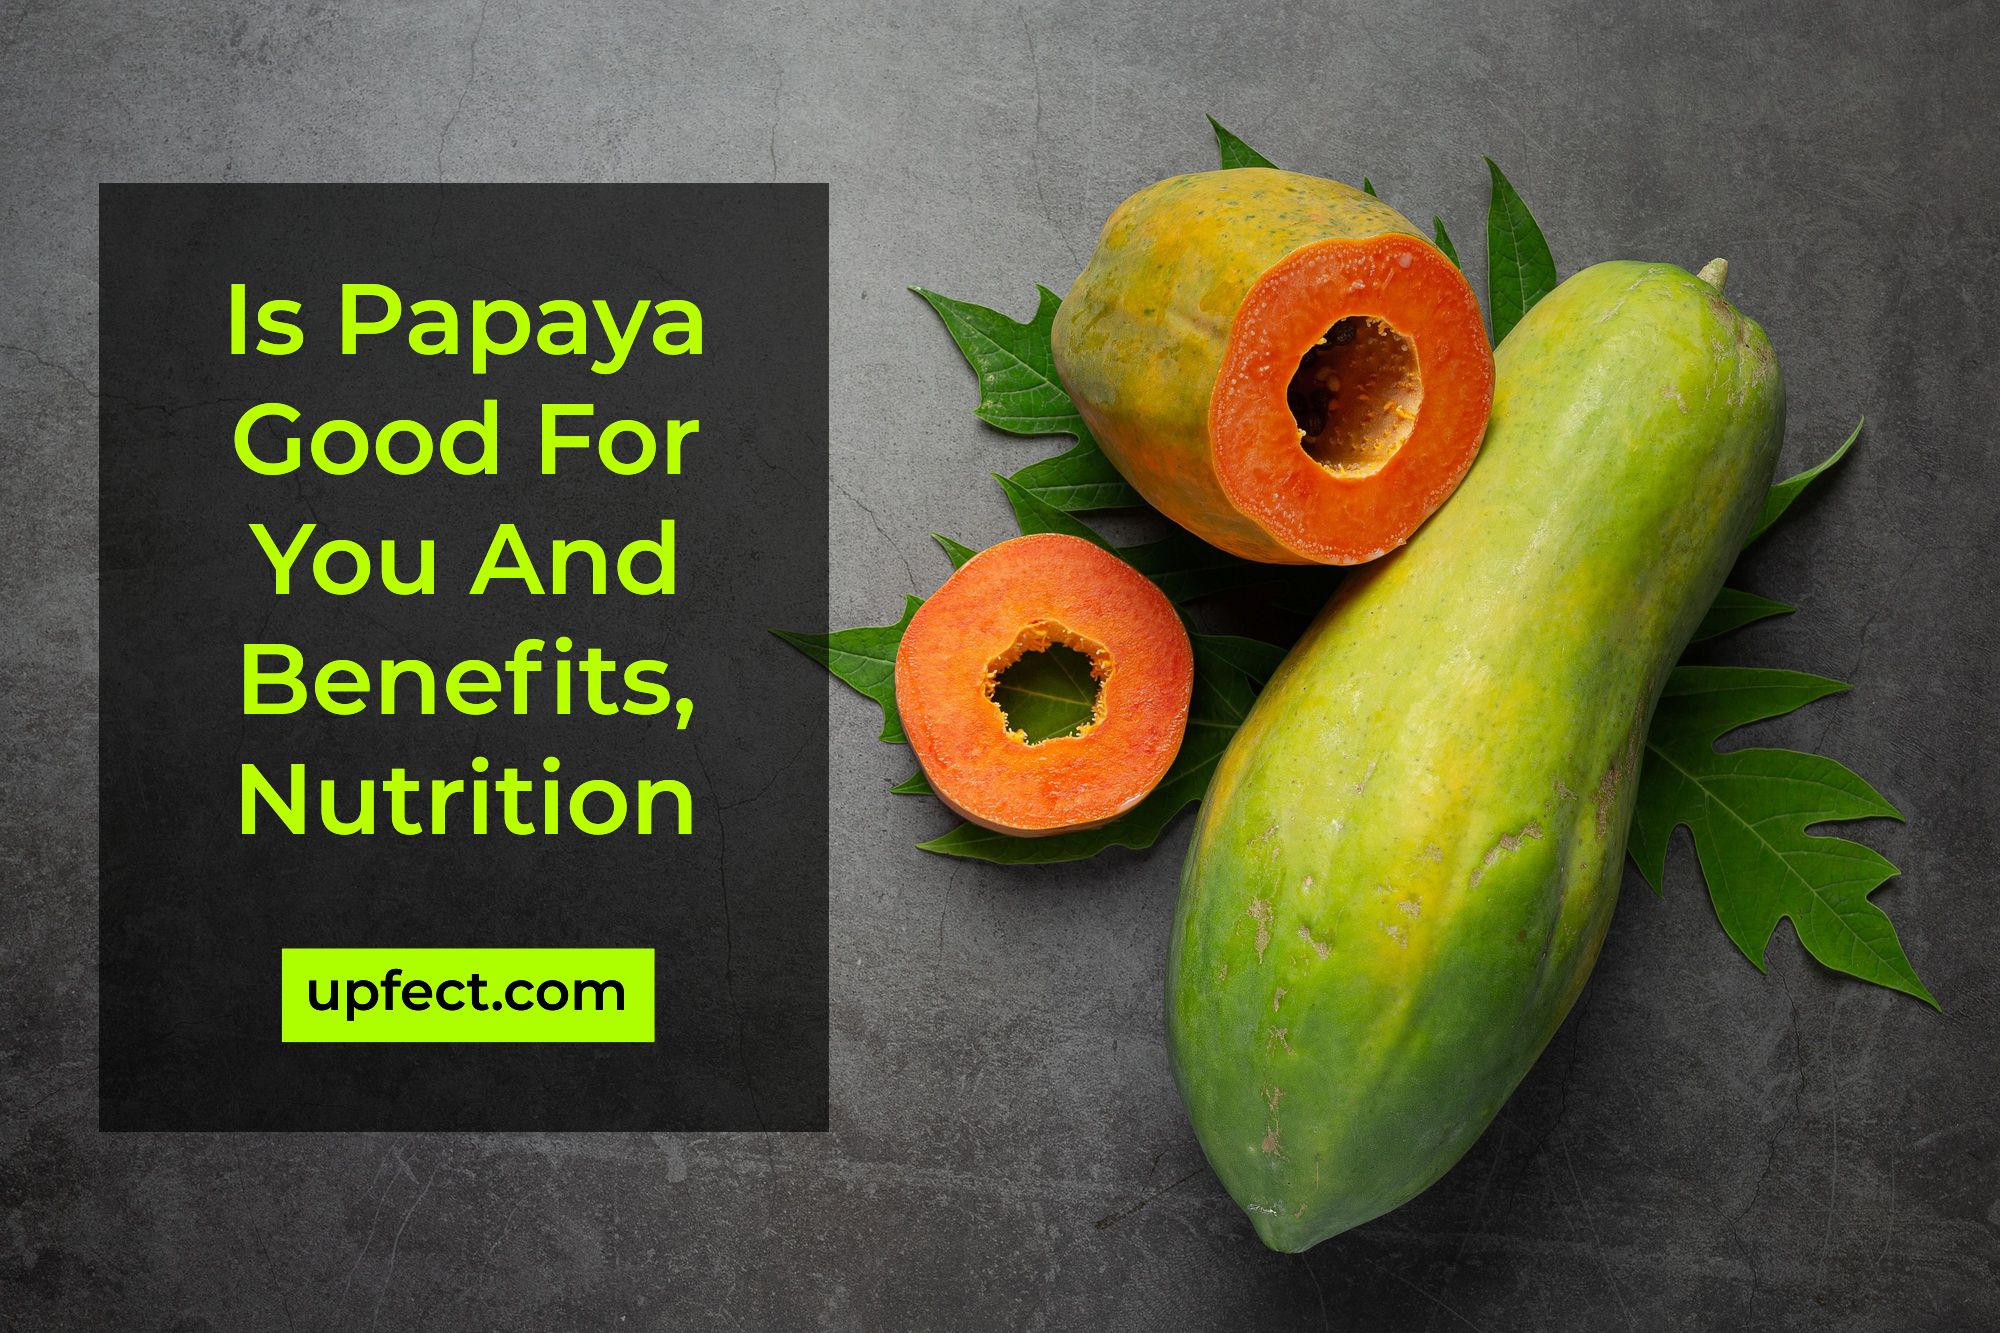 Is Papaya Good For You And Benefits, Nutrition